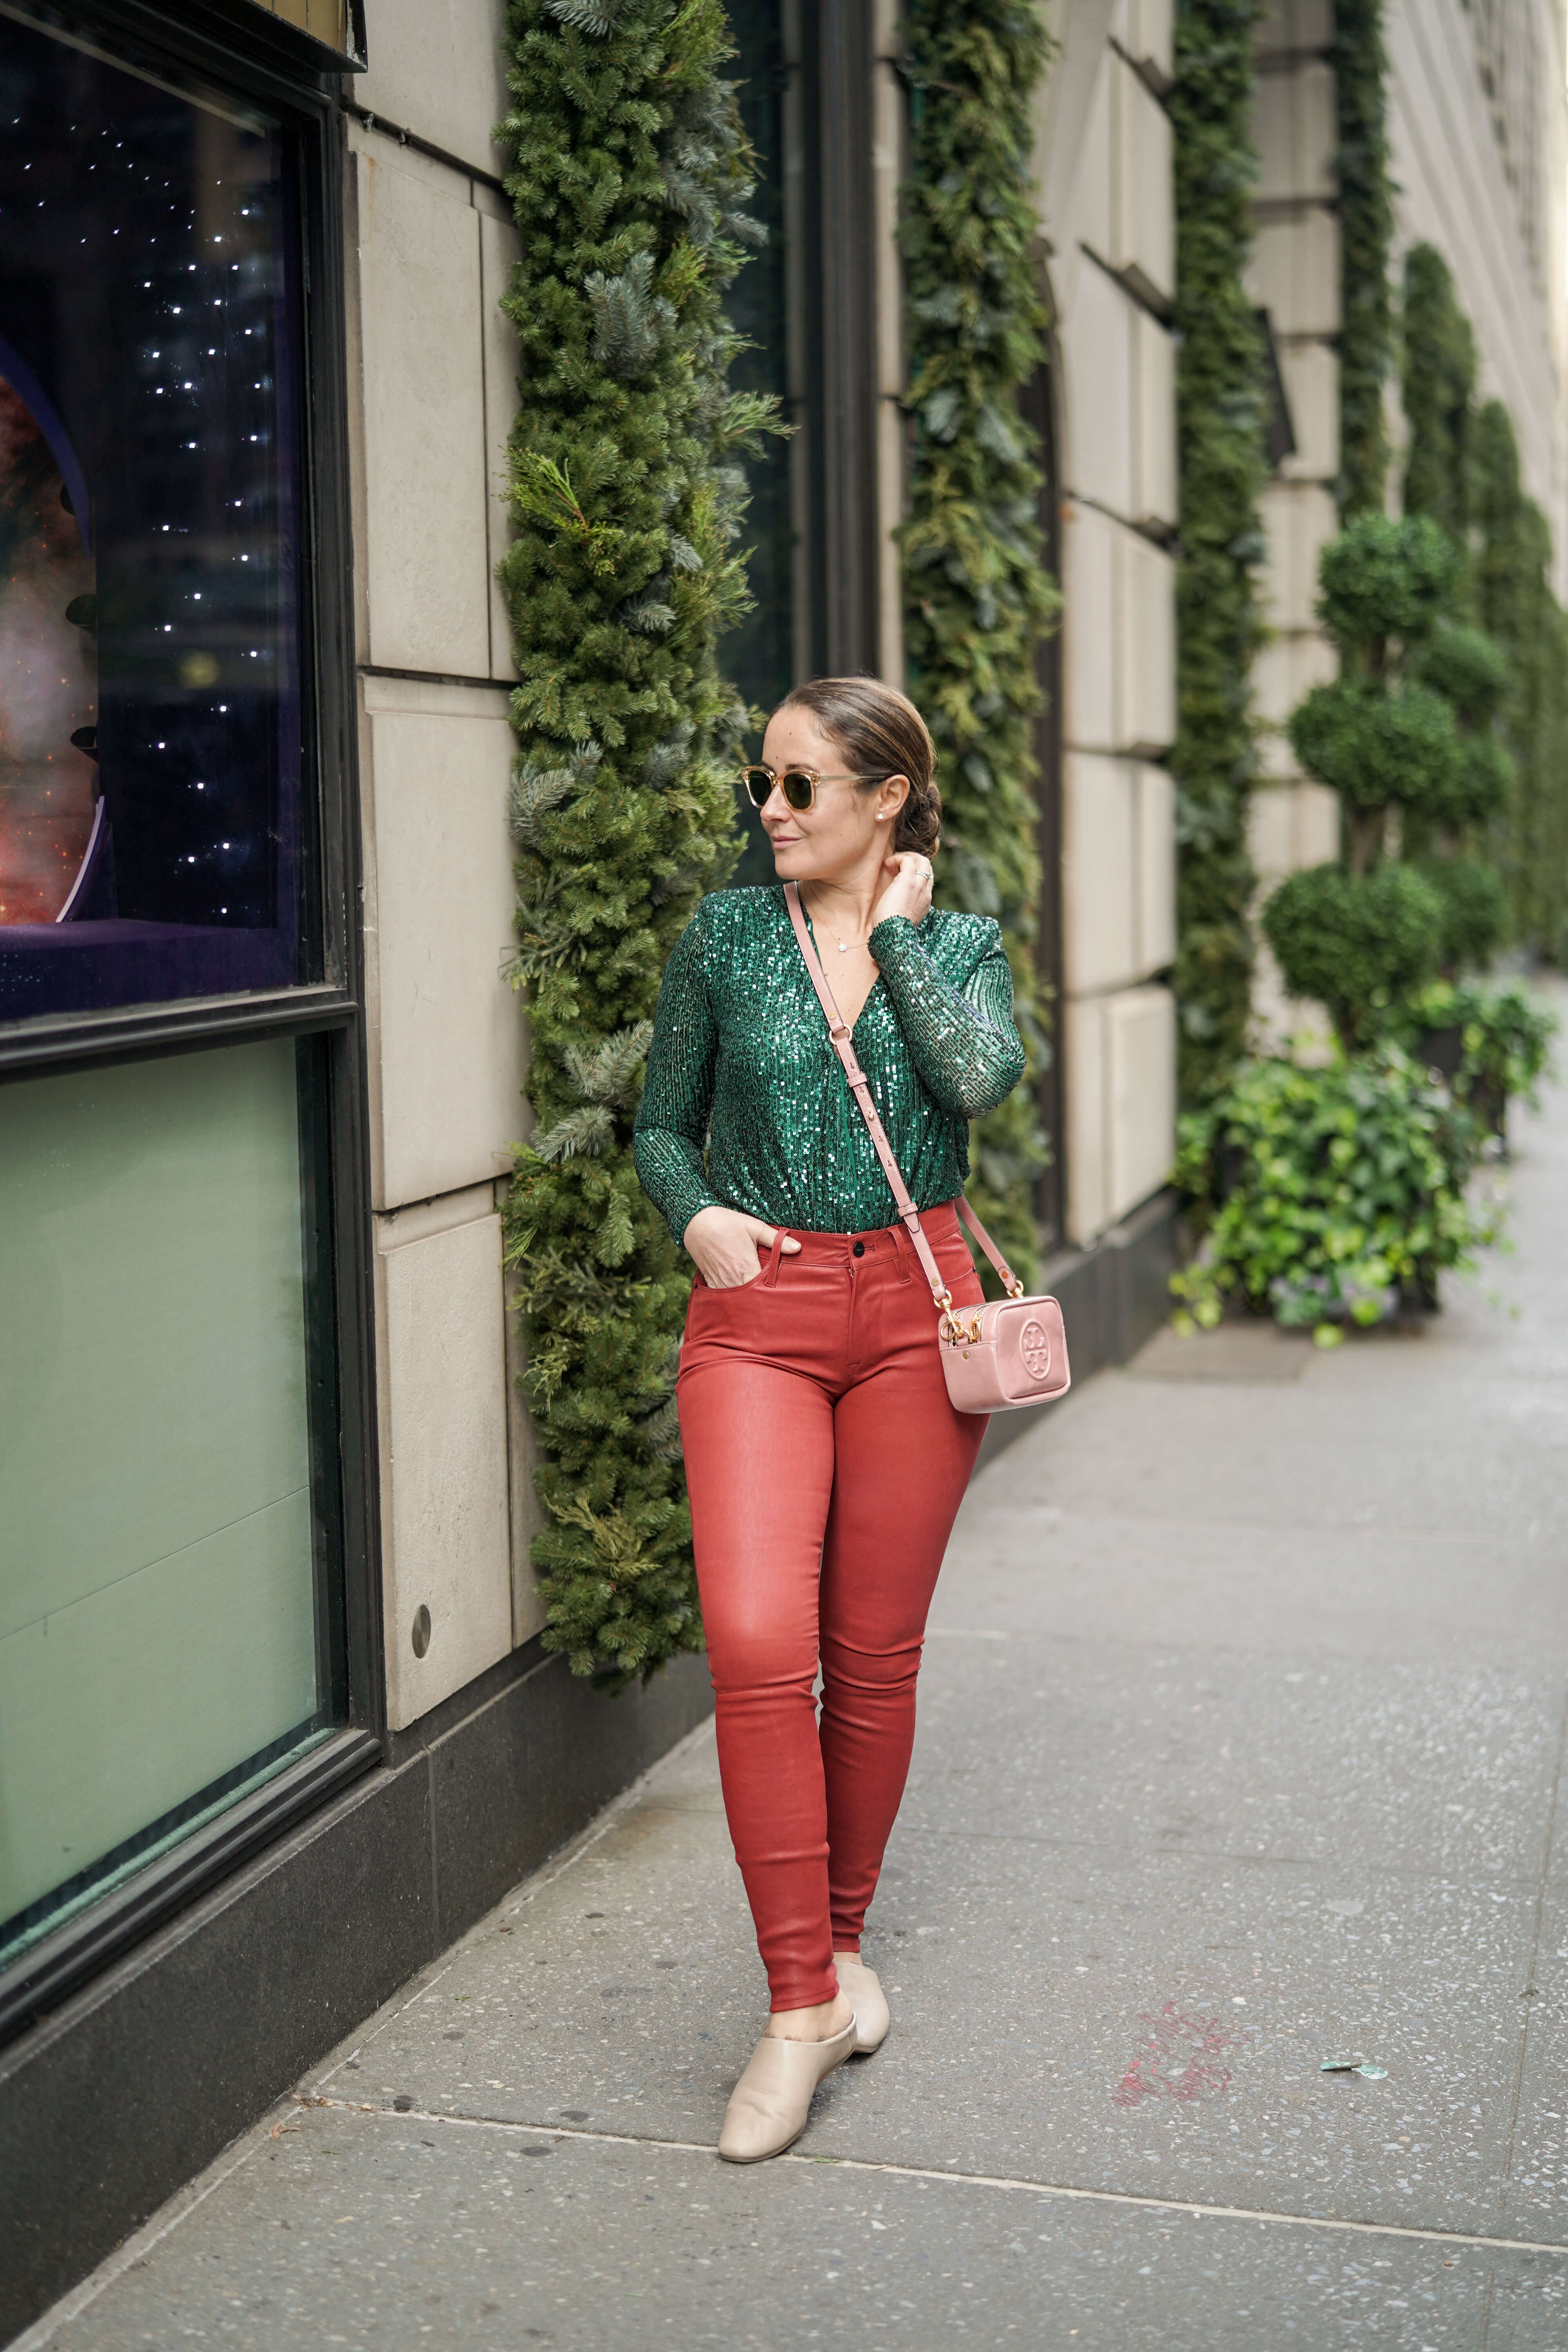 Green Sequin Body Suit Red Frame Leather Pants Tory Burch Bag Coclico Slides Outfit by Modnitsa Styling